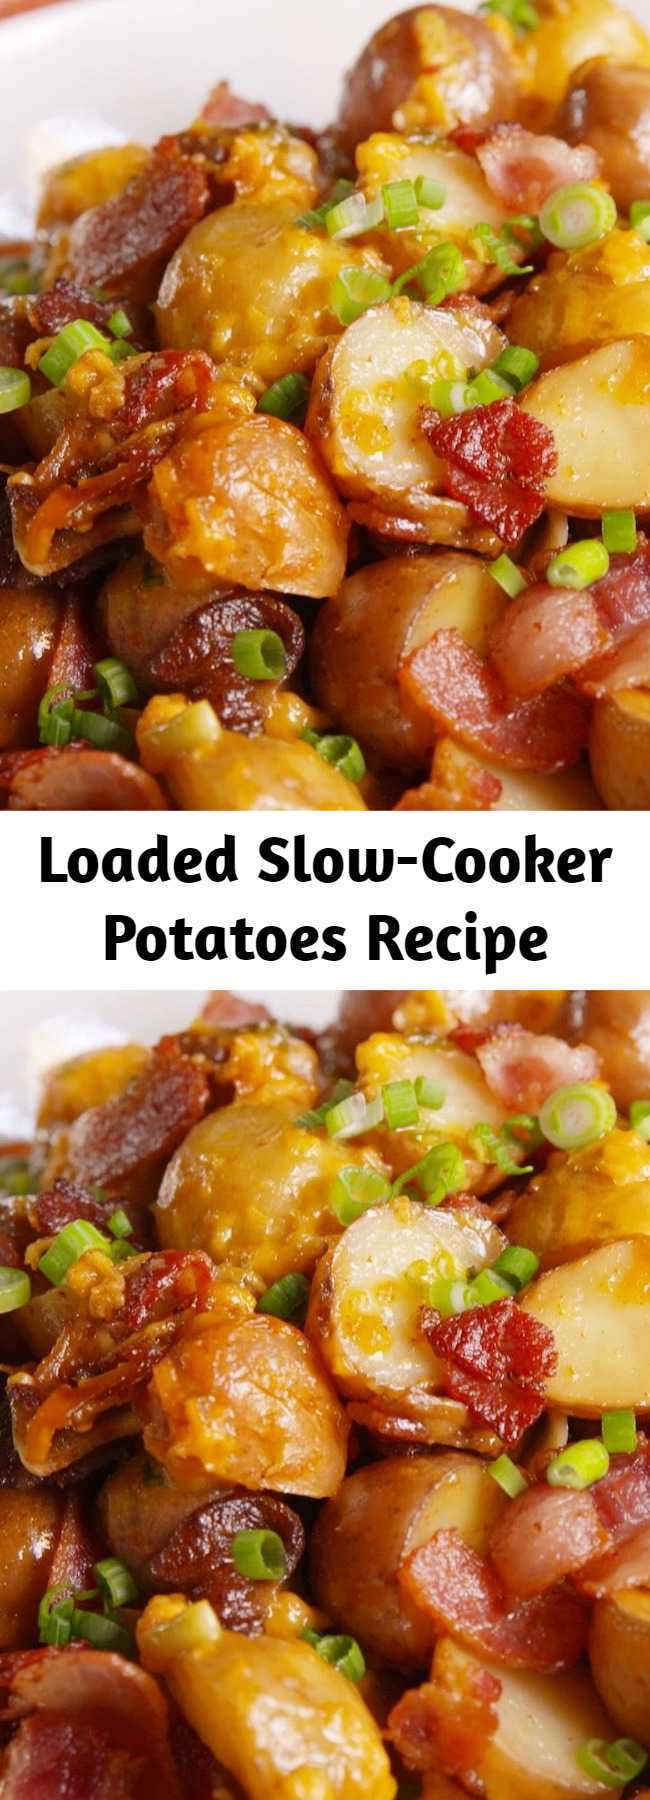 Loaded Slow-Cooker Potatoes Recipe - Loaded slow-cooker potatoes will save you so much oven space this Thanksgiving and Christmas. The best thing about comfort food is not actually have to cook it. #loaded #easy #recipe #bacon #cheese #cheesy #potatoes #thanksgiving #christmas #sides #vegetables #slowcooker #crockpot